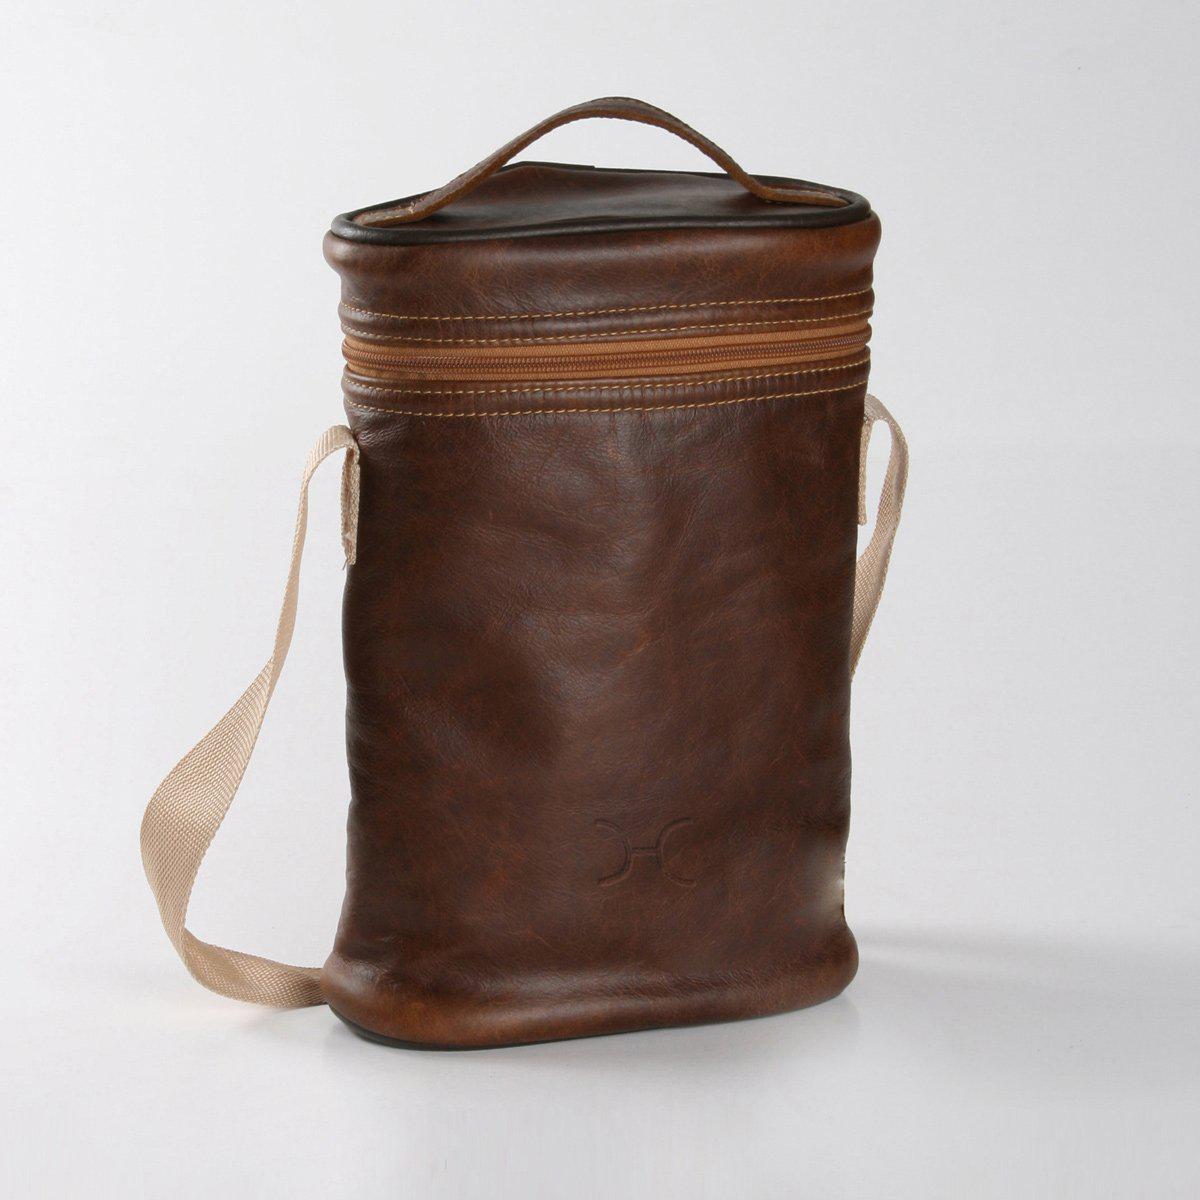 Buy Li cooler/lunch bag at  - The swedish leather brand